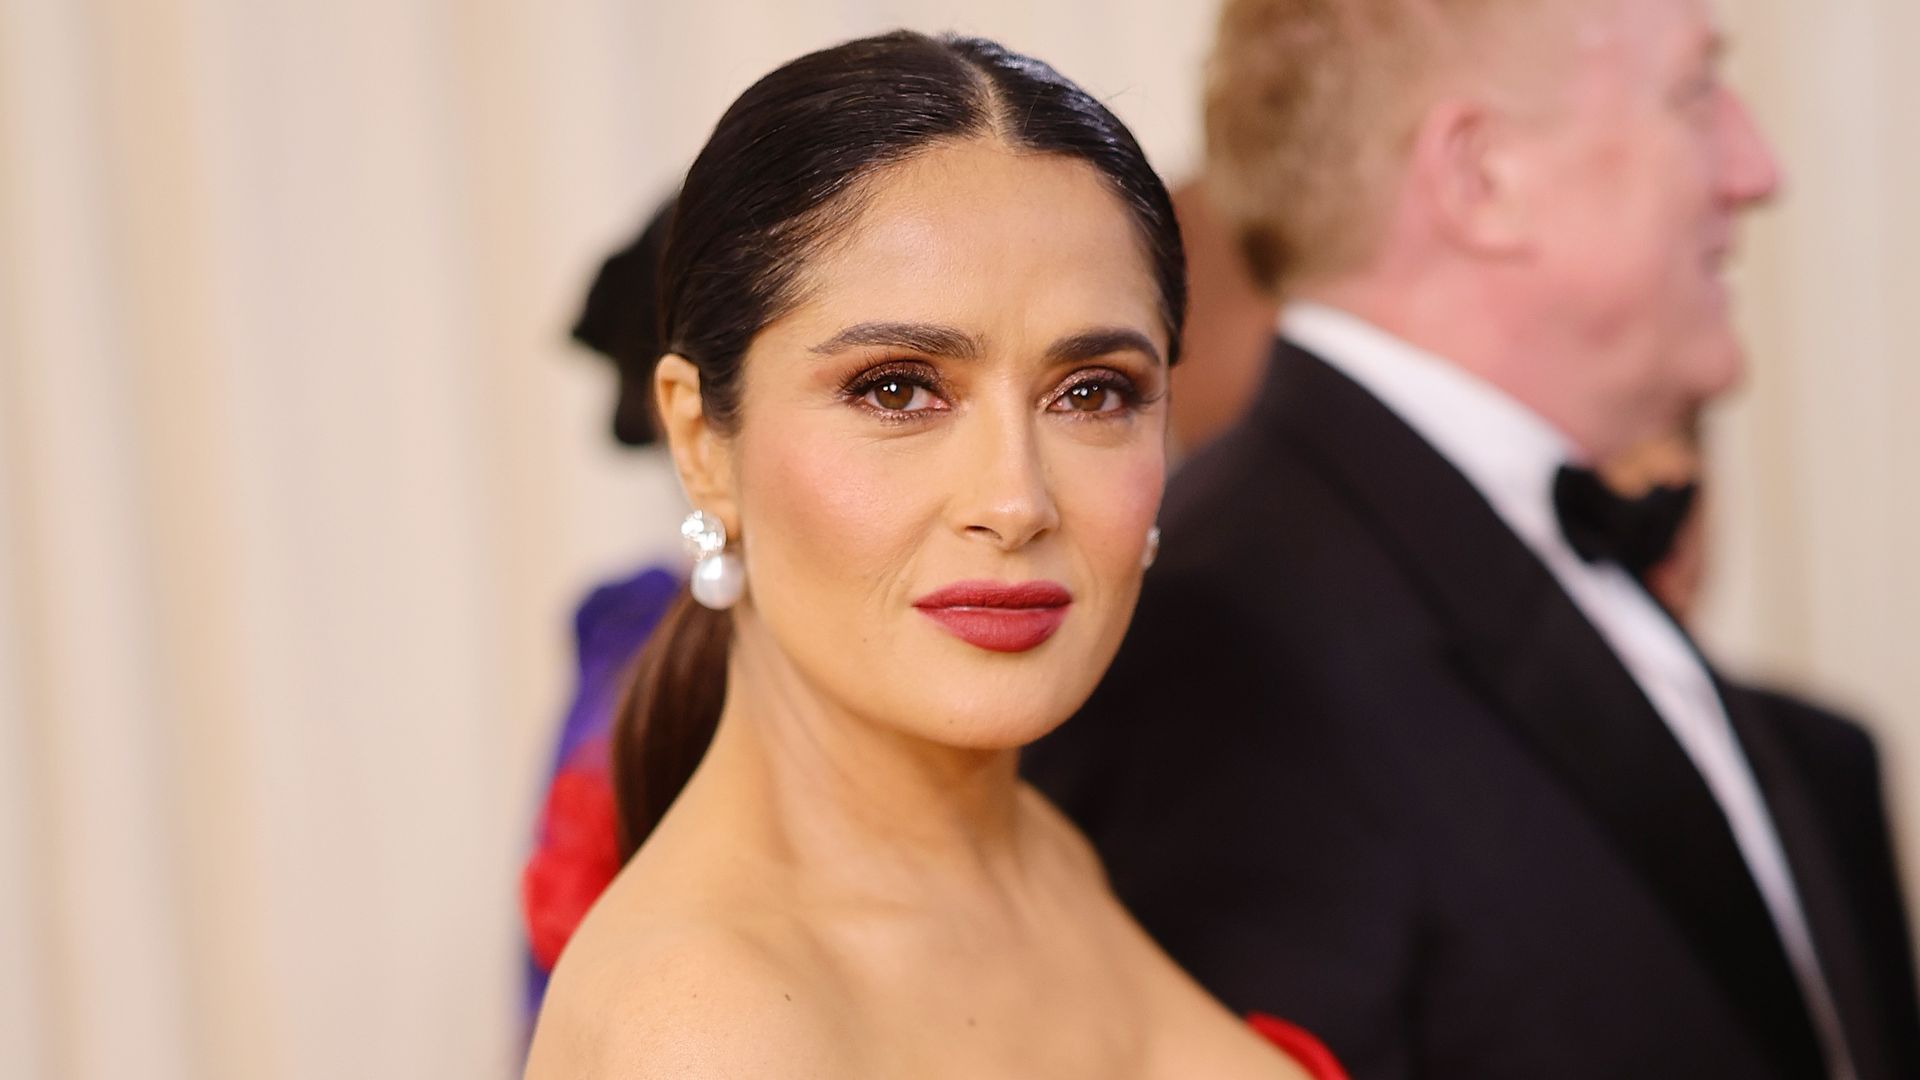 Salma Hayek Pinault attends The 2023 Met Gala Celebrating "Karl Lagerfeld: A Line Of Beauty" at The Metropolitan Museum of Art on May 01, 2023 in New York City.